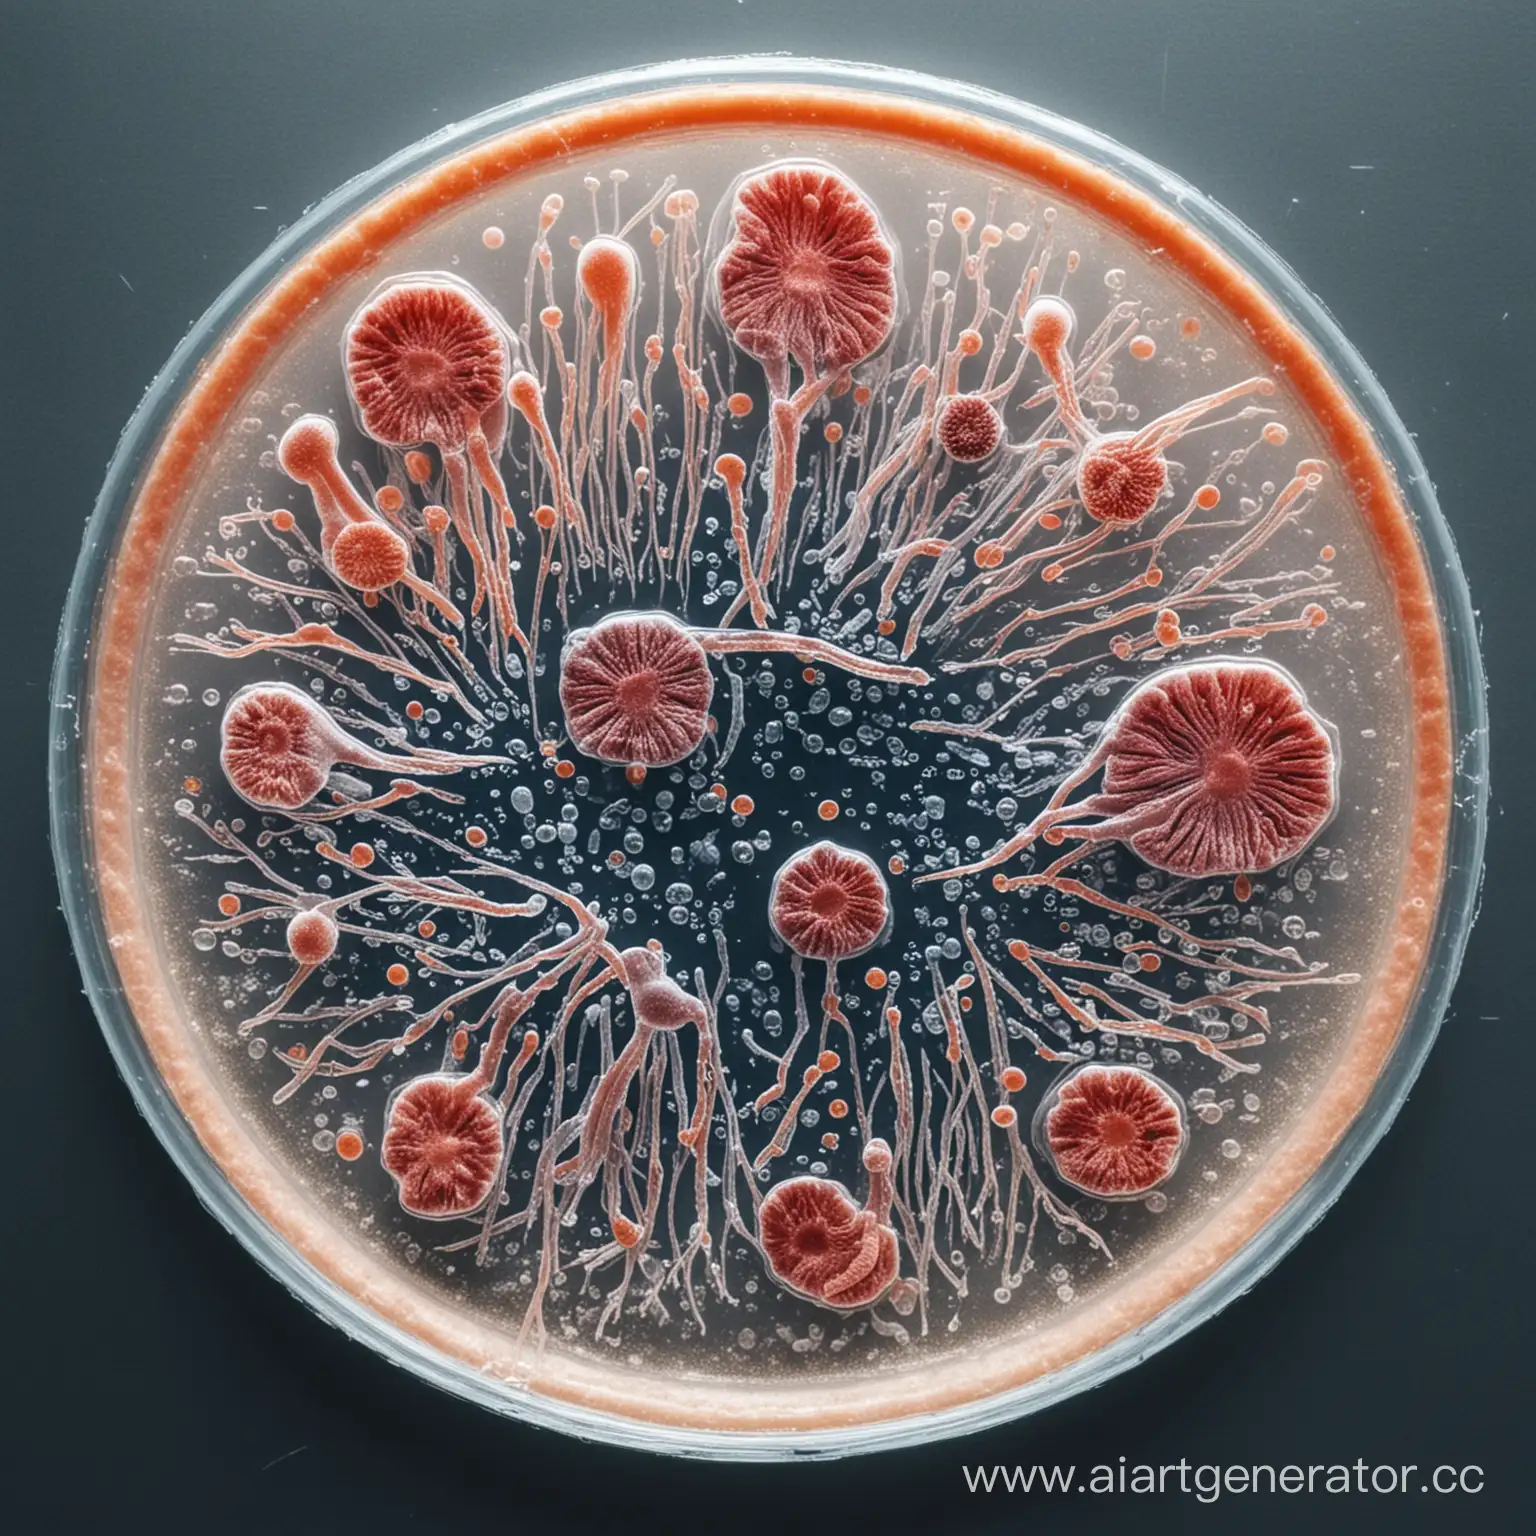 Colorful-Microorganisms-Growing-in-a-Petri-Dish